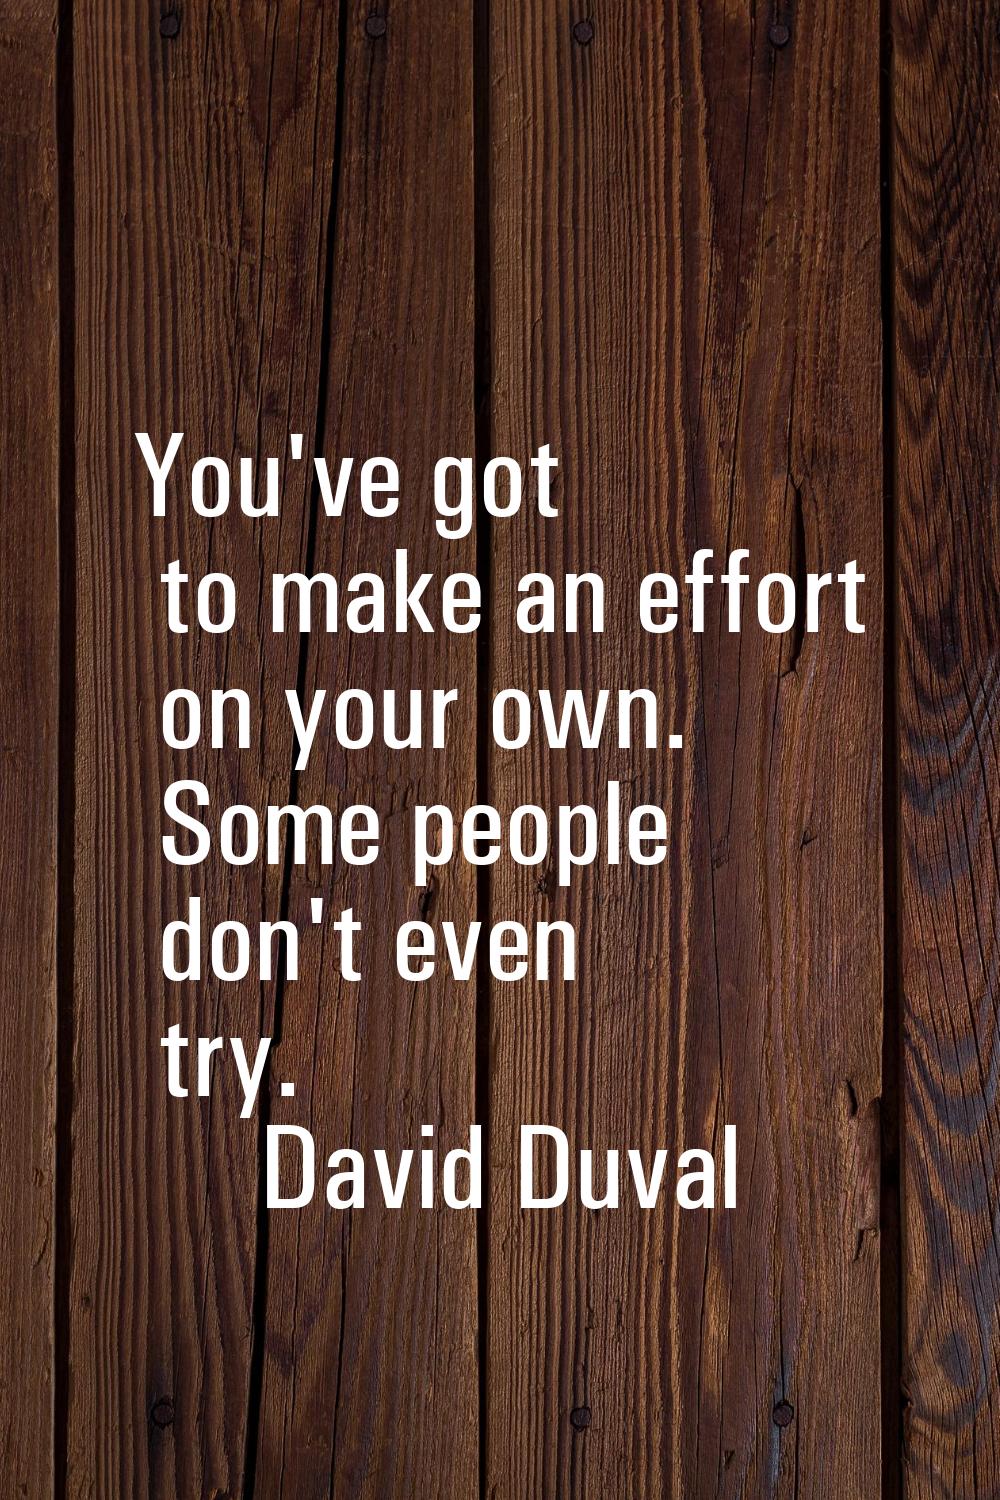 You've got to make an effort on your own. Some people don't even try.